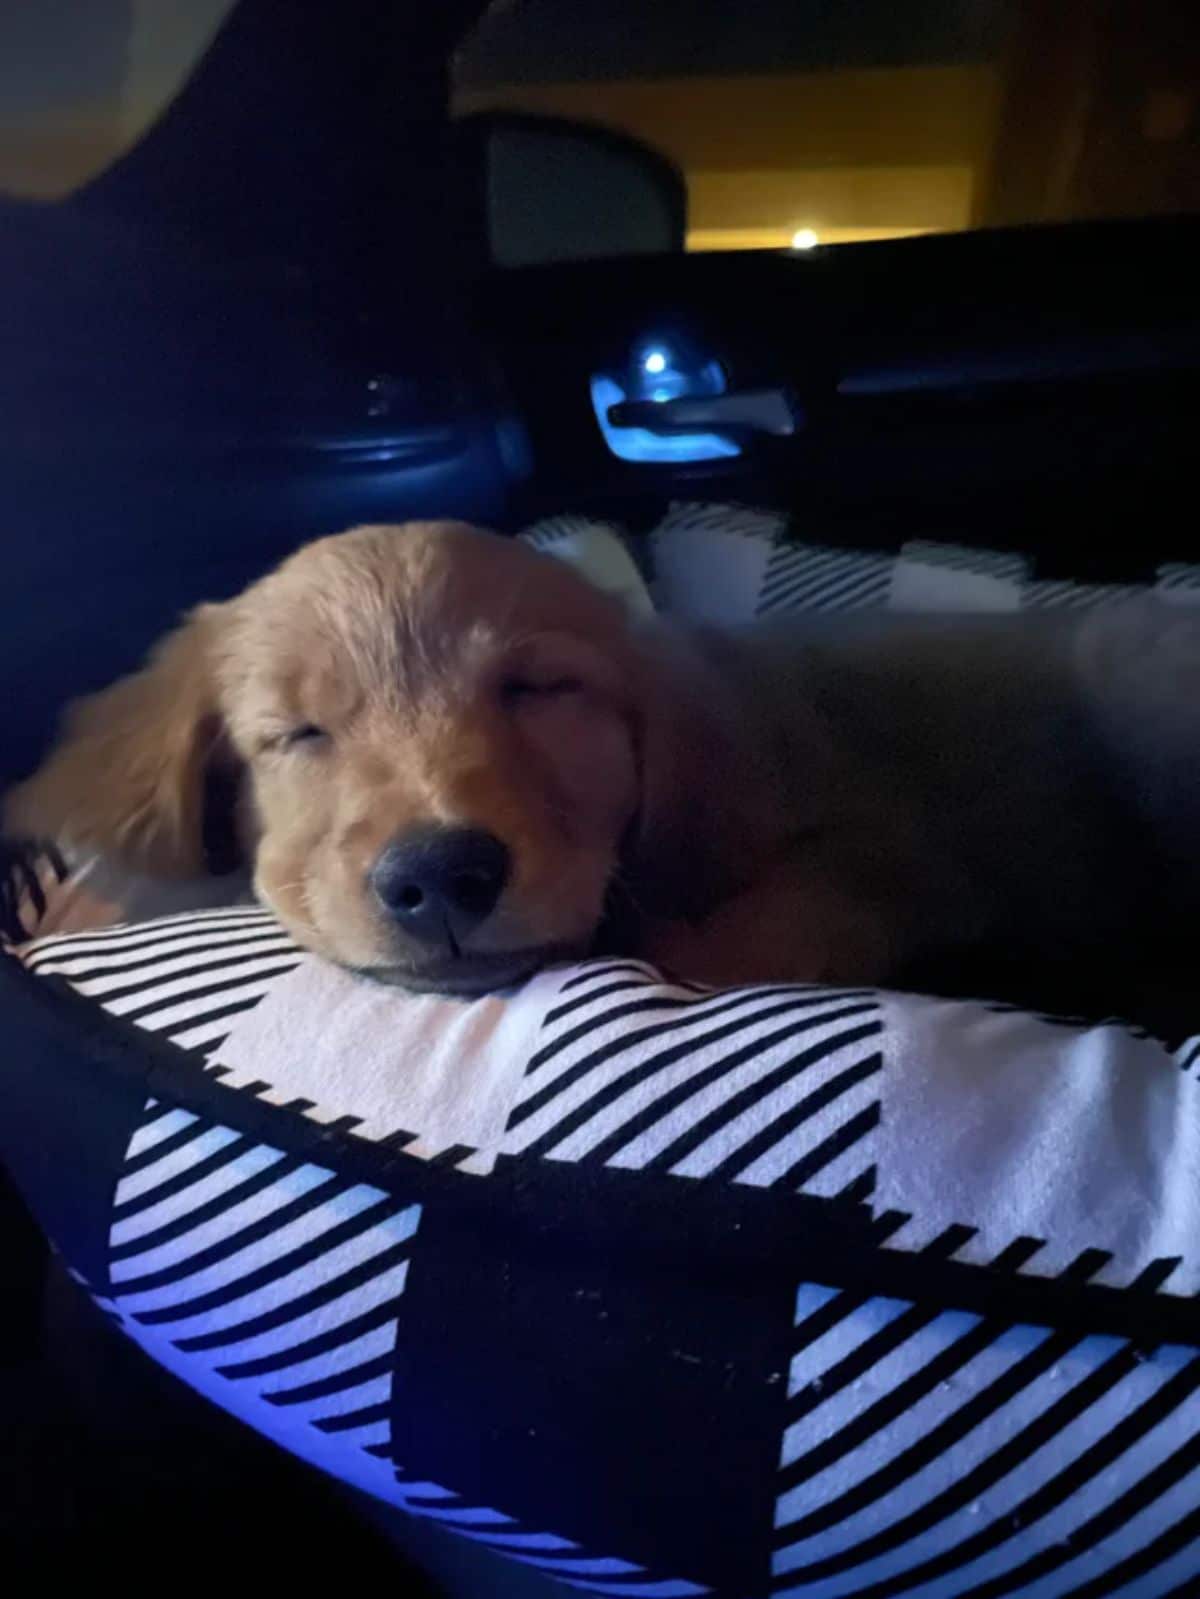 golden retriever puppy sleeping on a black and white dog bed